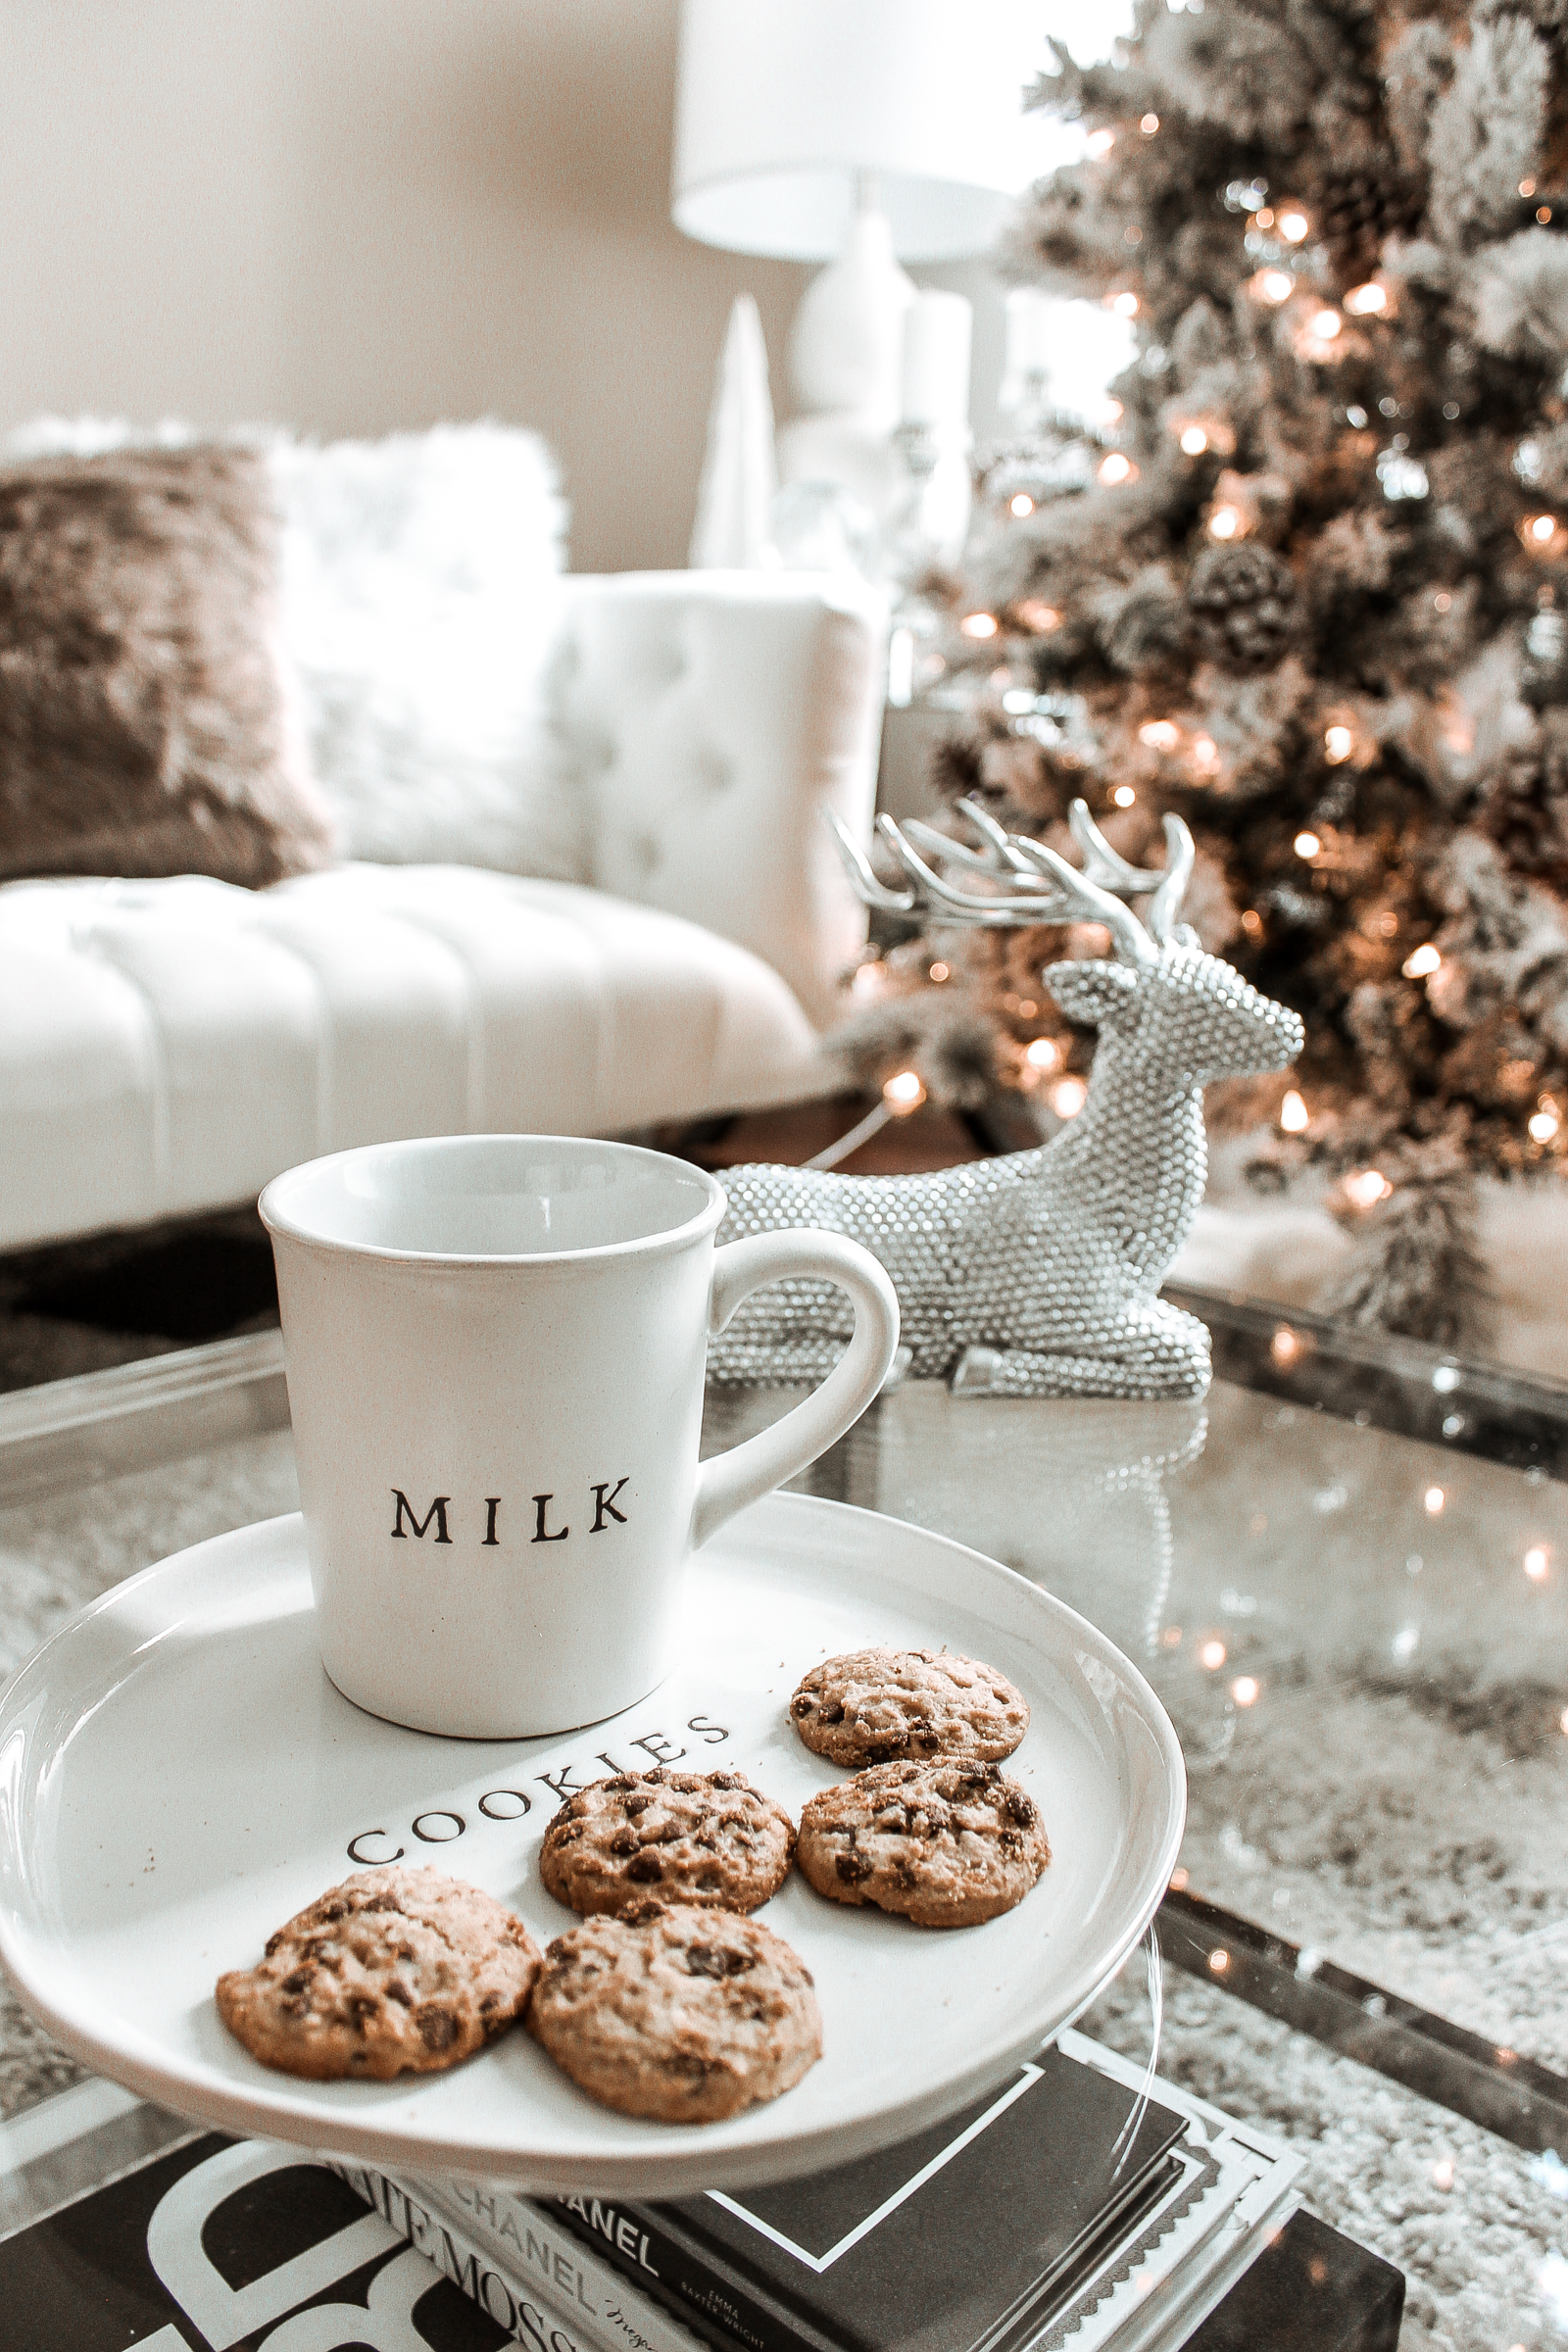 Neutral Christmas Decor | Flocked Christmas Tree | Pinecone Christmas Tree | Milk & Cookies | Hayley Larue Decor | Brown, Green, & White Christmas Decor | Blondie in the City by Hayley Larue